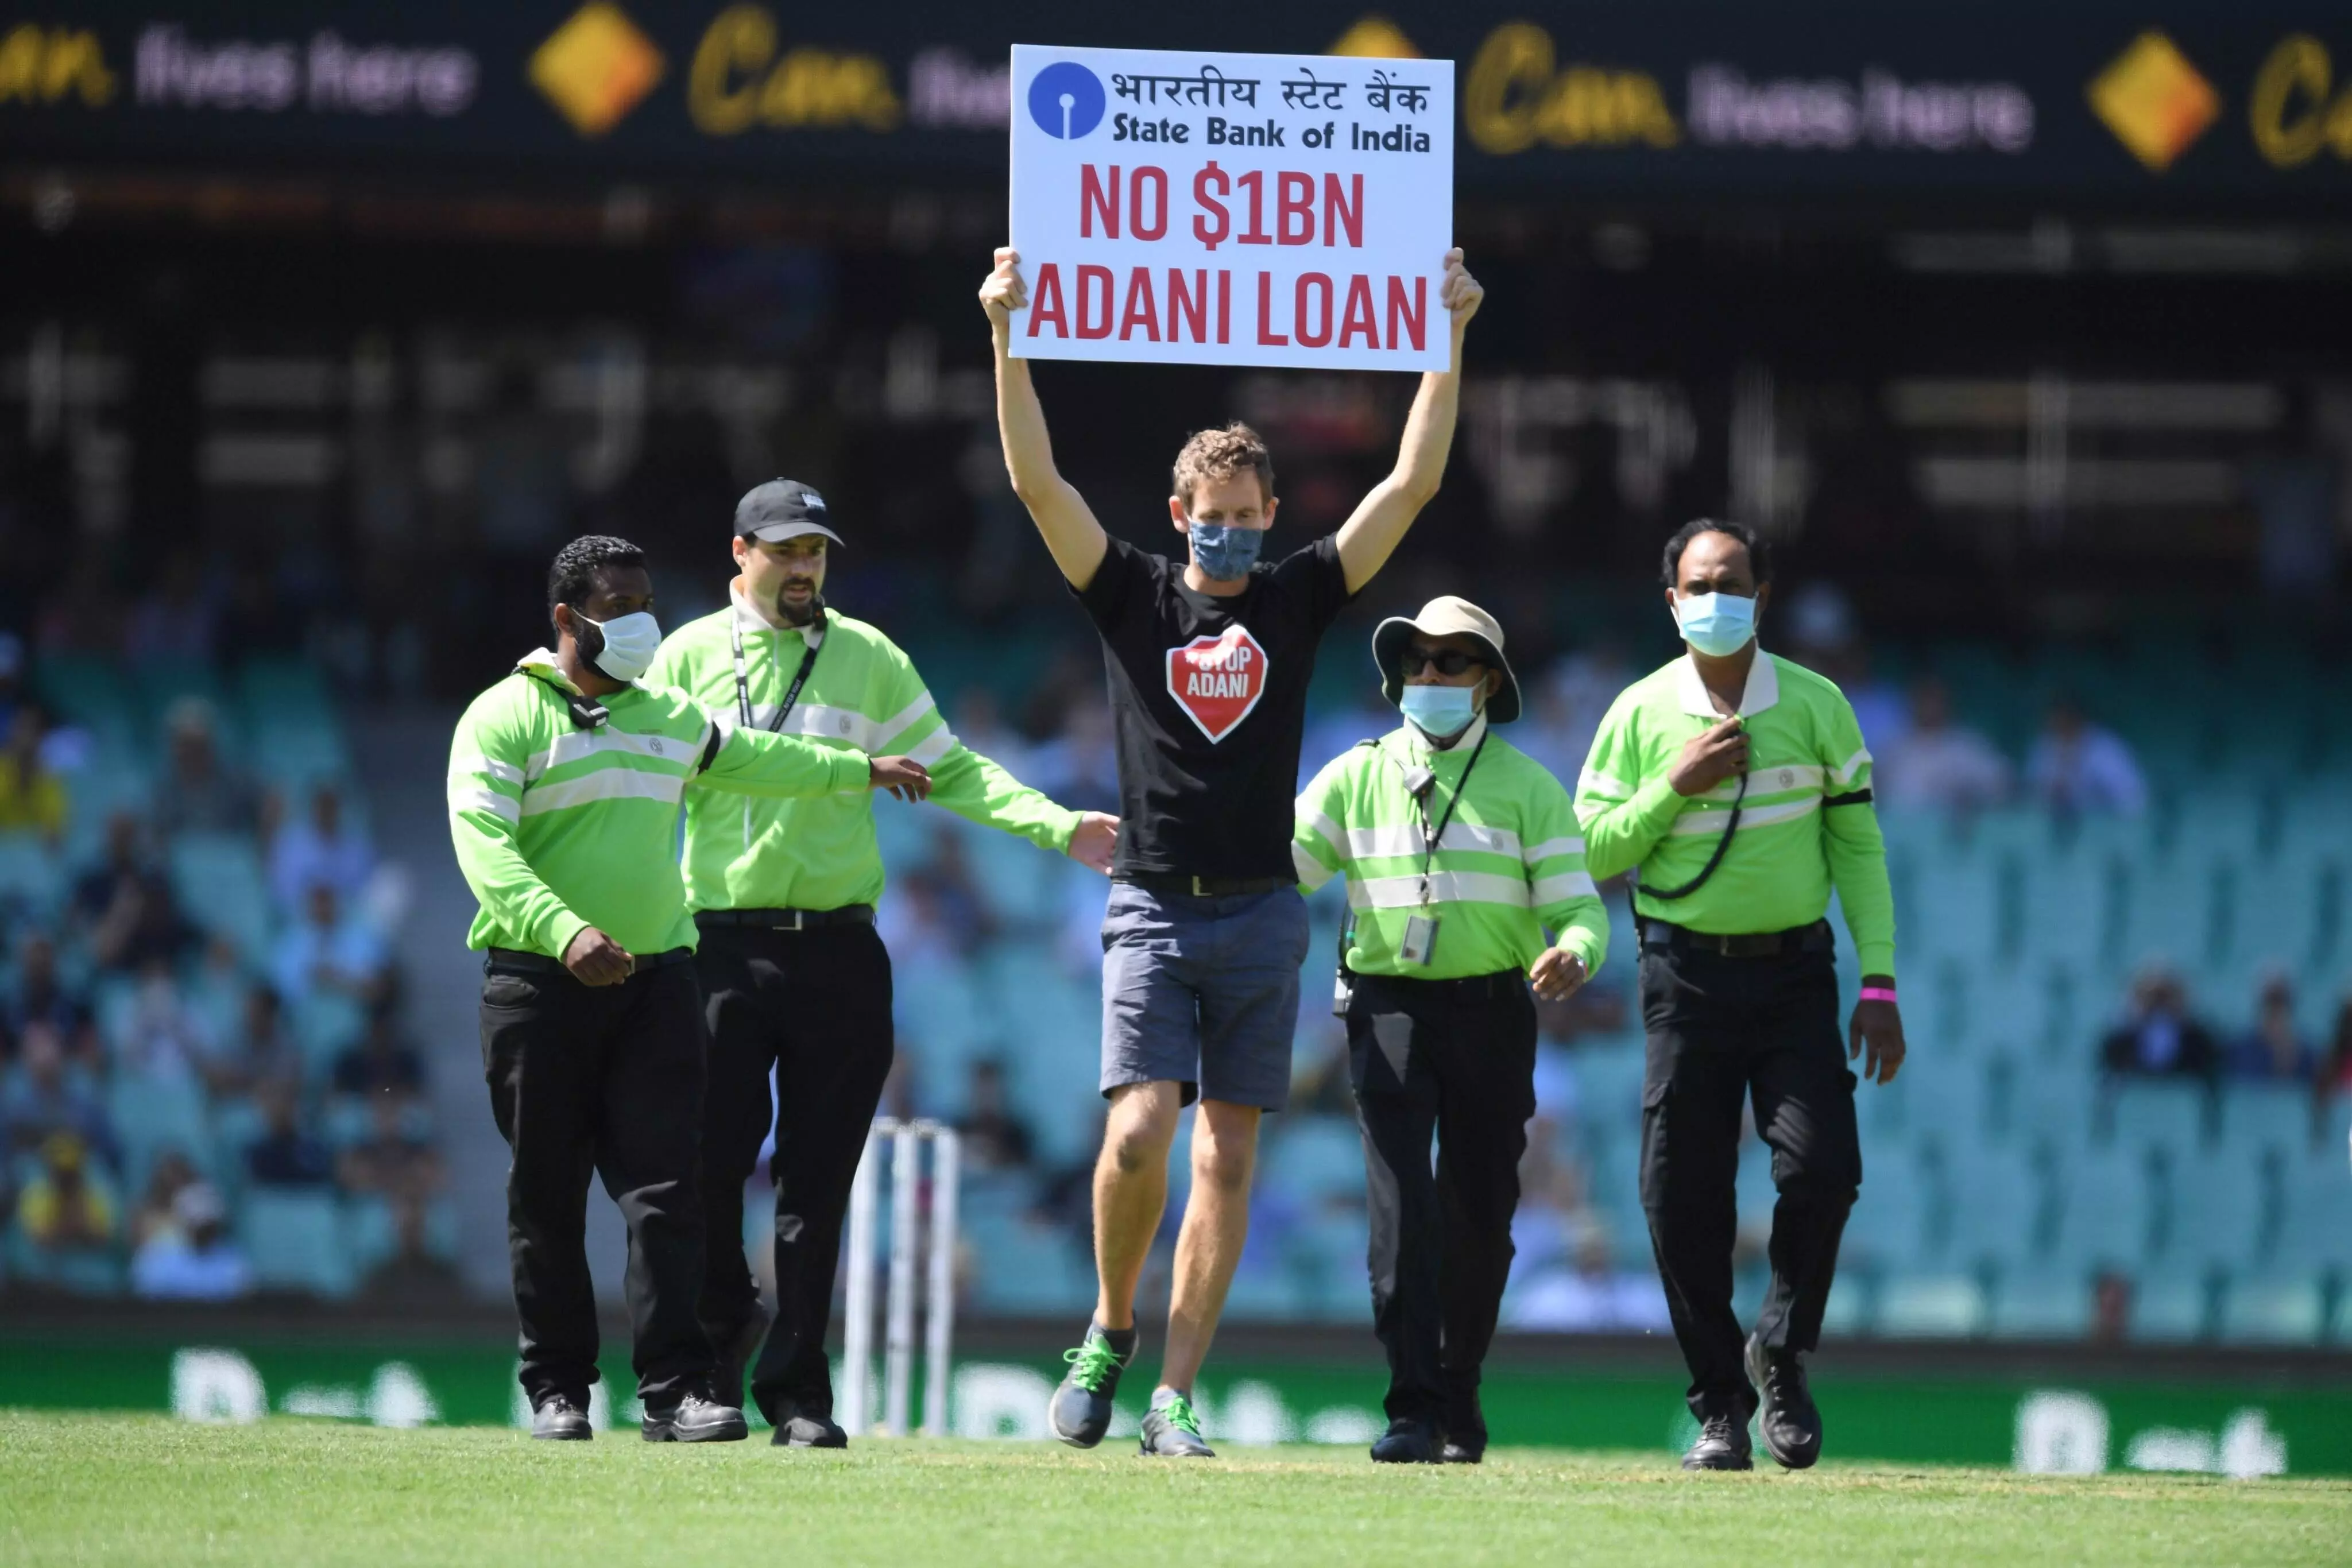 Spectator runs on to field with No $1BN Adani Loan protest sign during first Ind vs Aus ODI